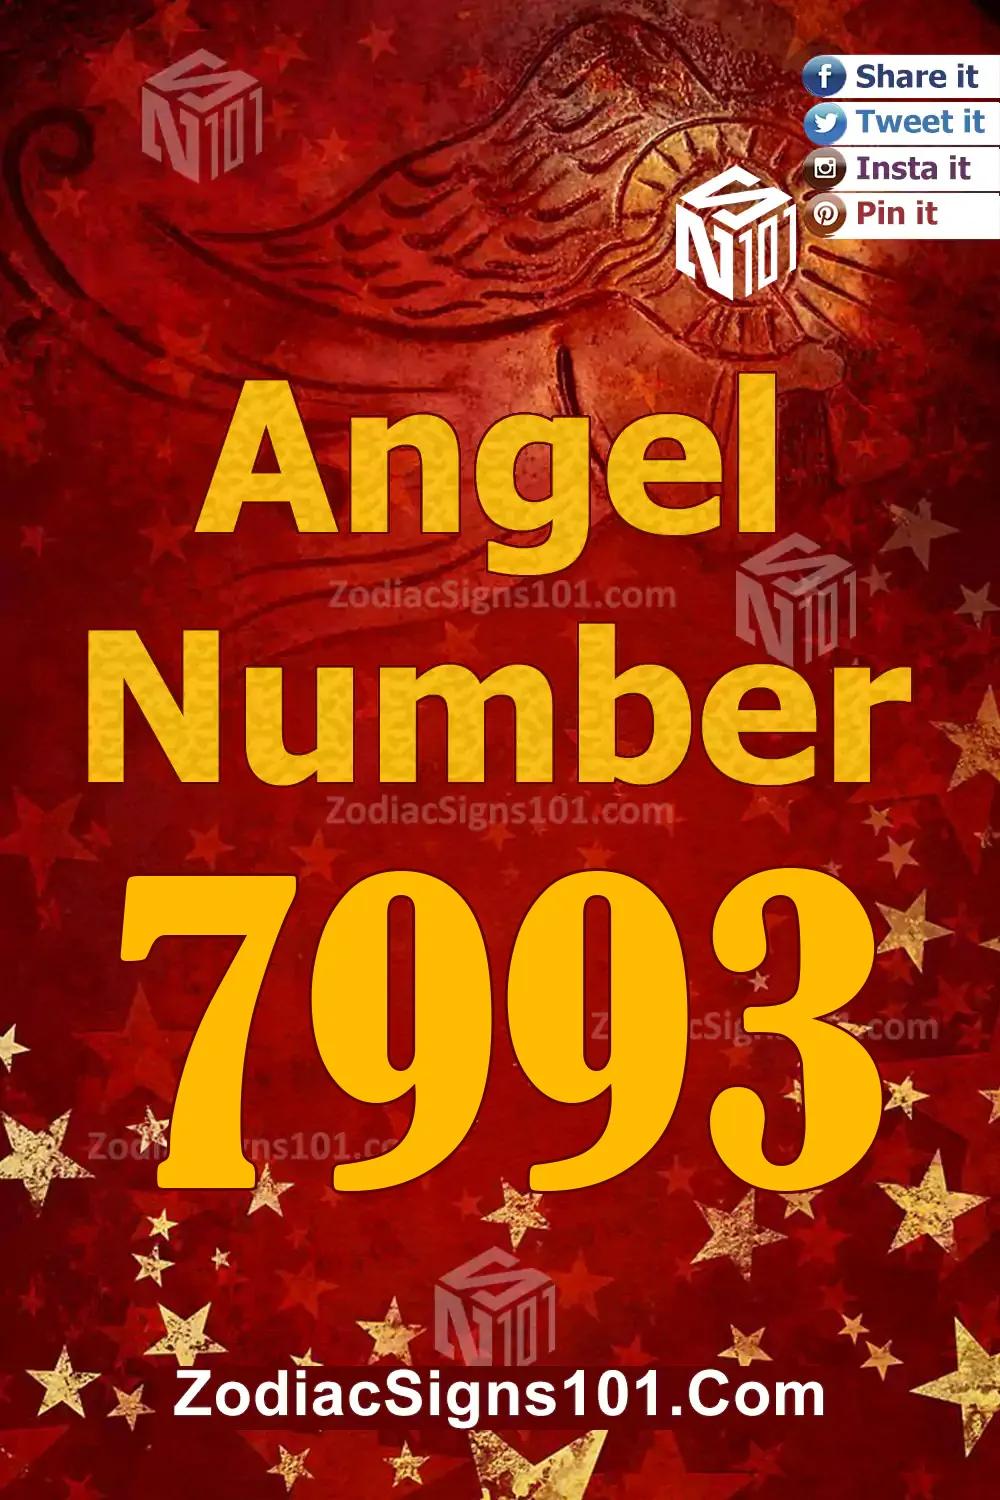 7993 Angel Number Meaning